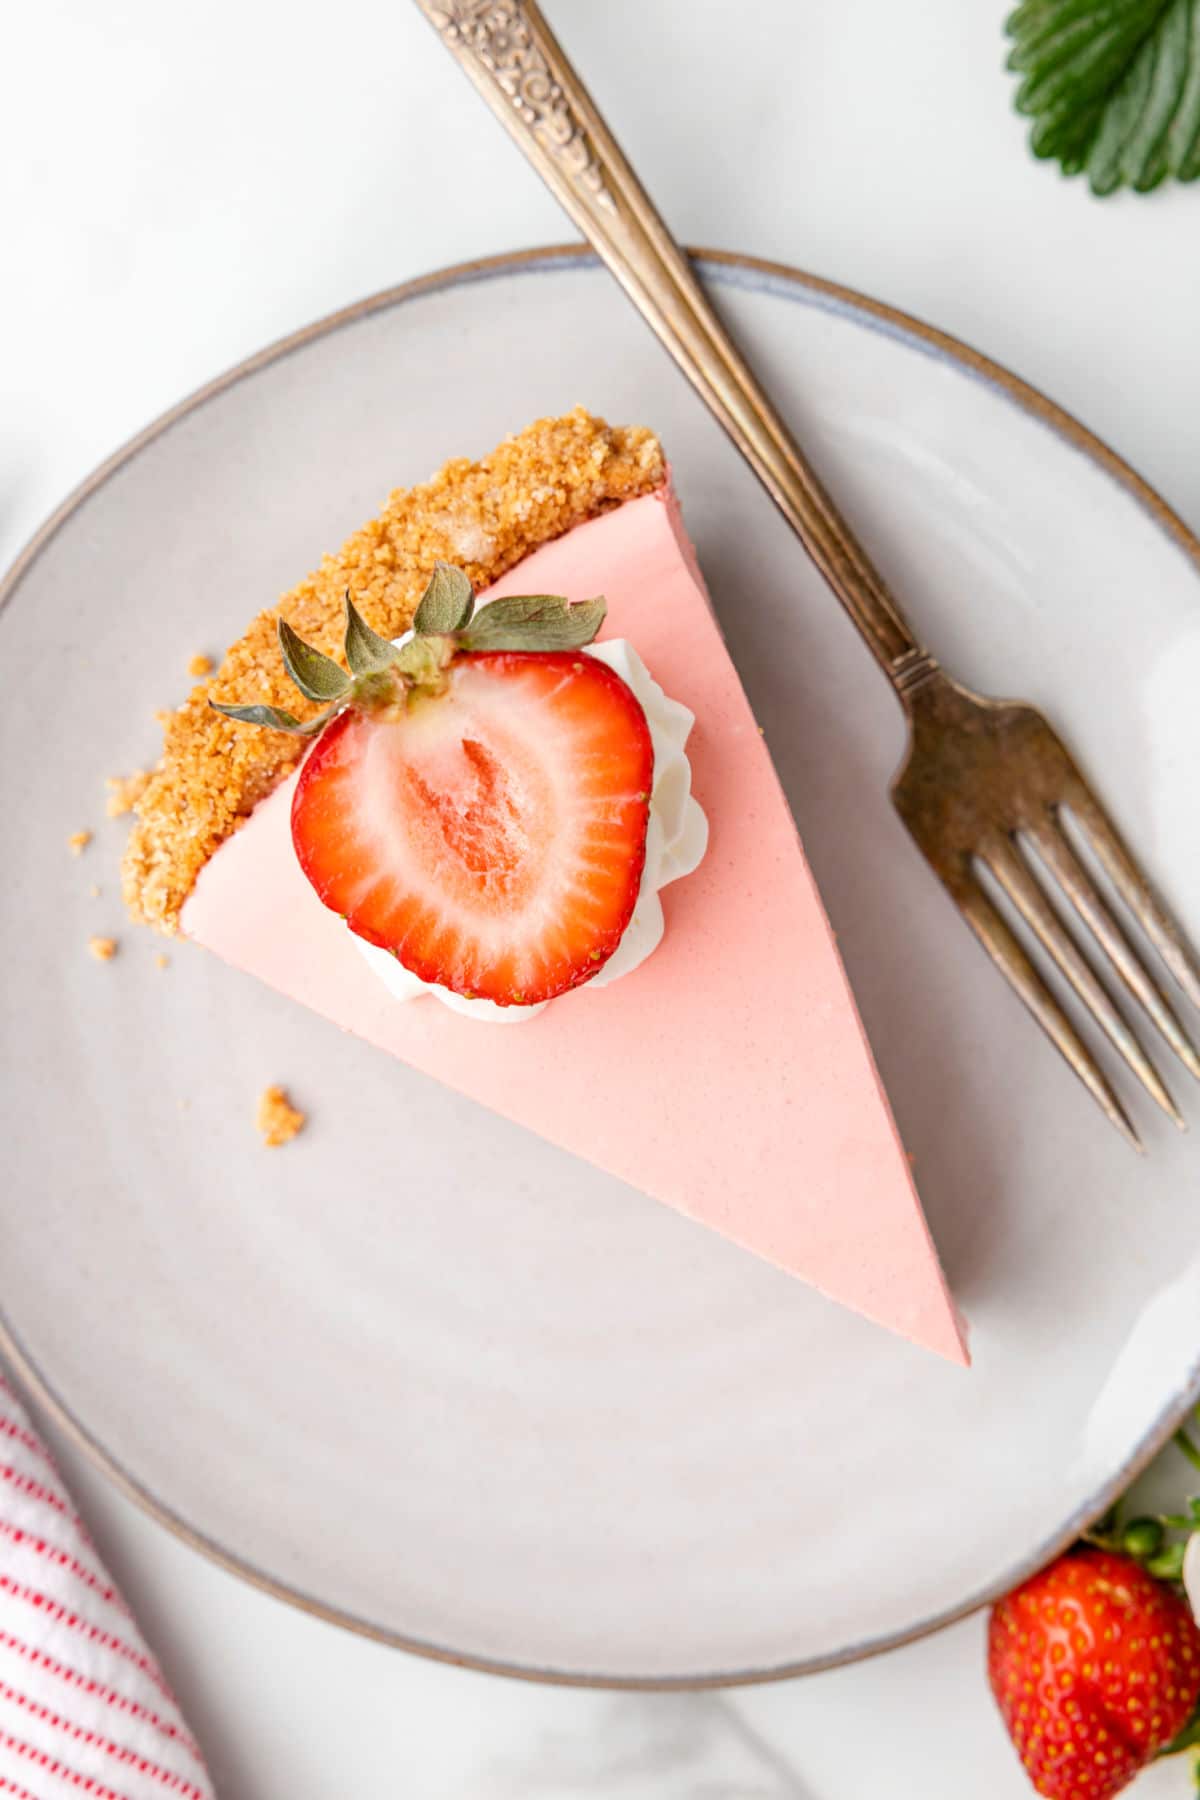 Strawberry Jello pie on a plate with a fork.